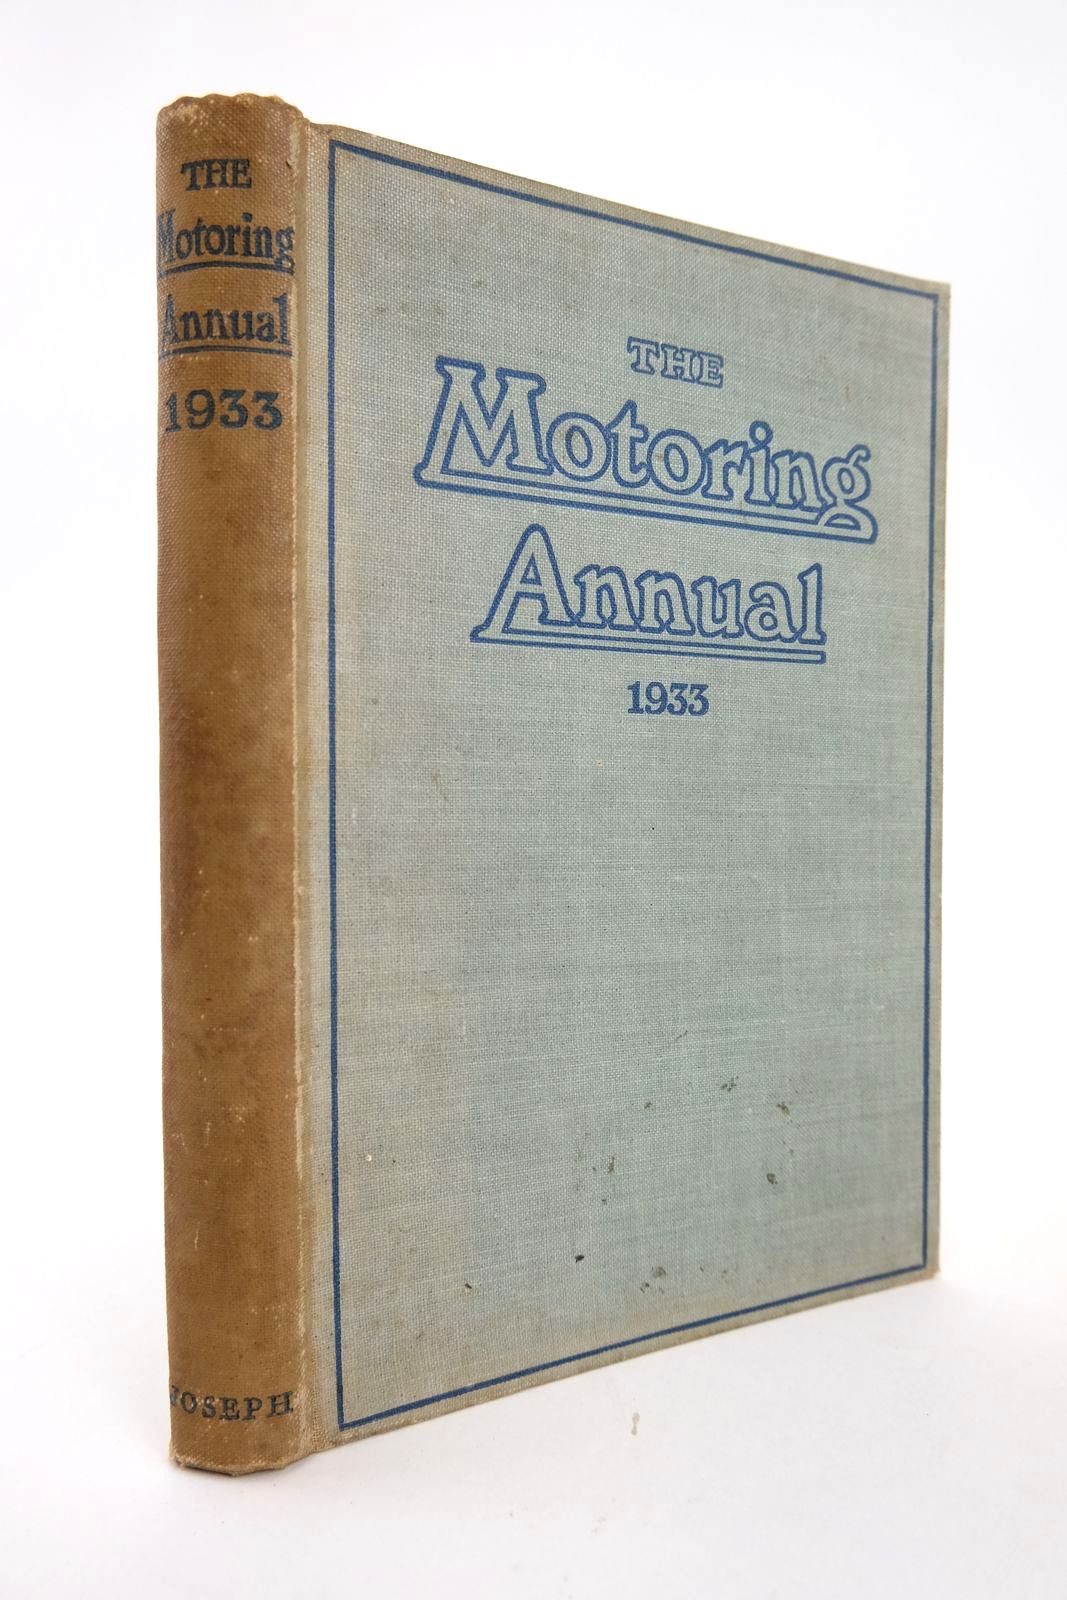 Photo of THE MOTORING ANNUAL 1933 written by Henslowe, Leonard published by Herbert Joseph (STOCK CODE: 2133445)  for sale by Stella & Rose's Books